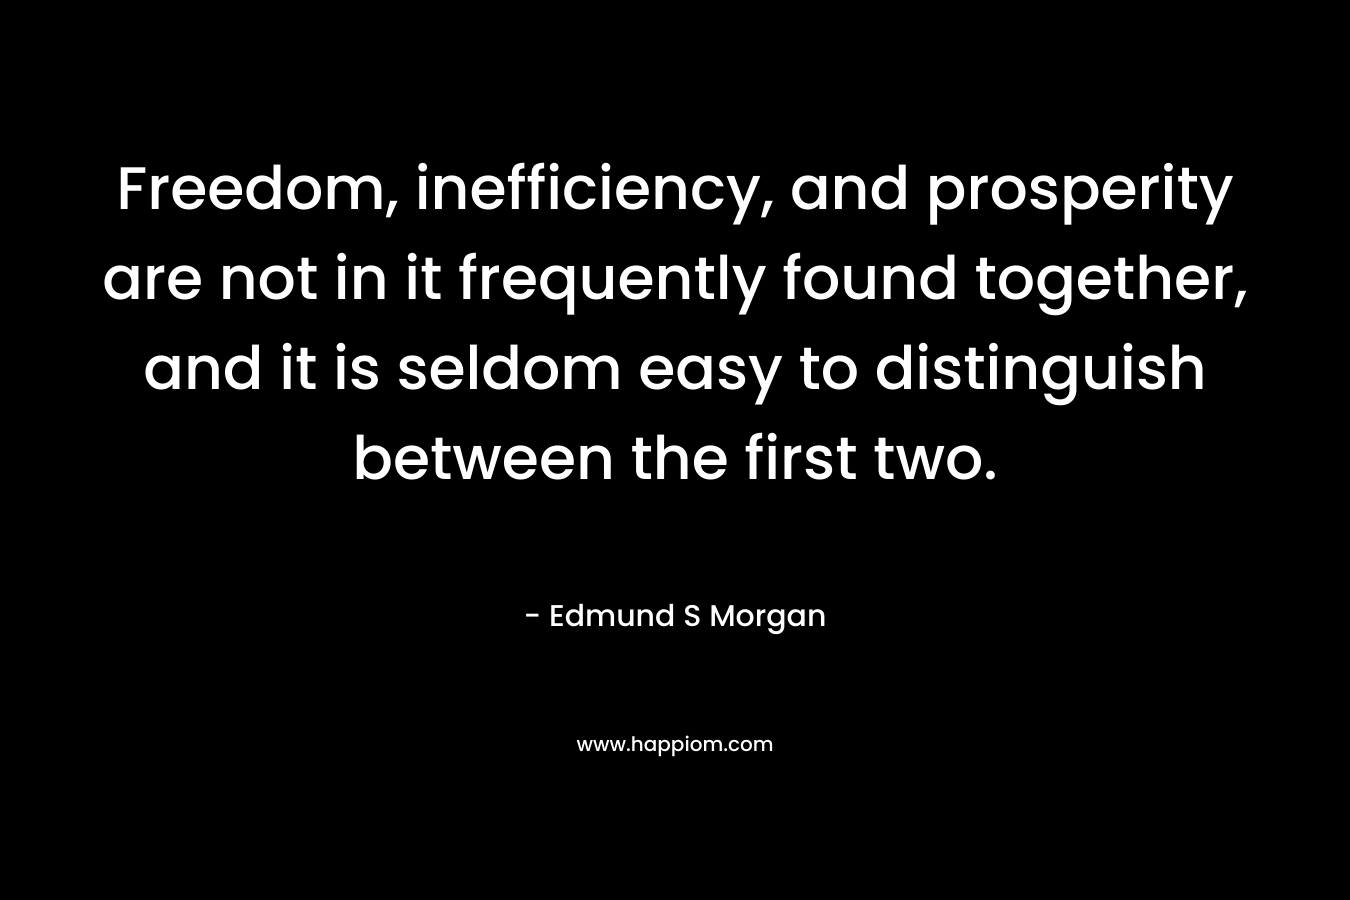 Freedom, inefficiency, and prosperity are not in it frequently found together, and it is seldom easy to distinguish between the first two. – Edmund S Morgan